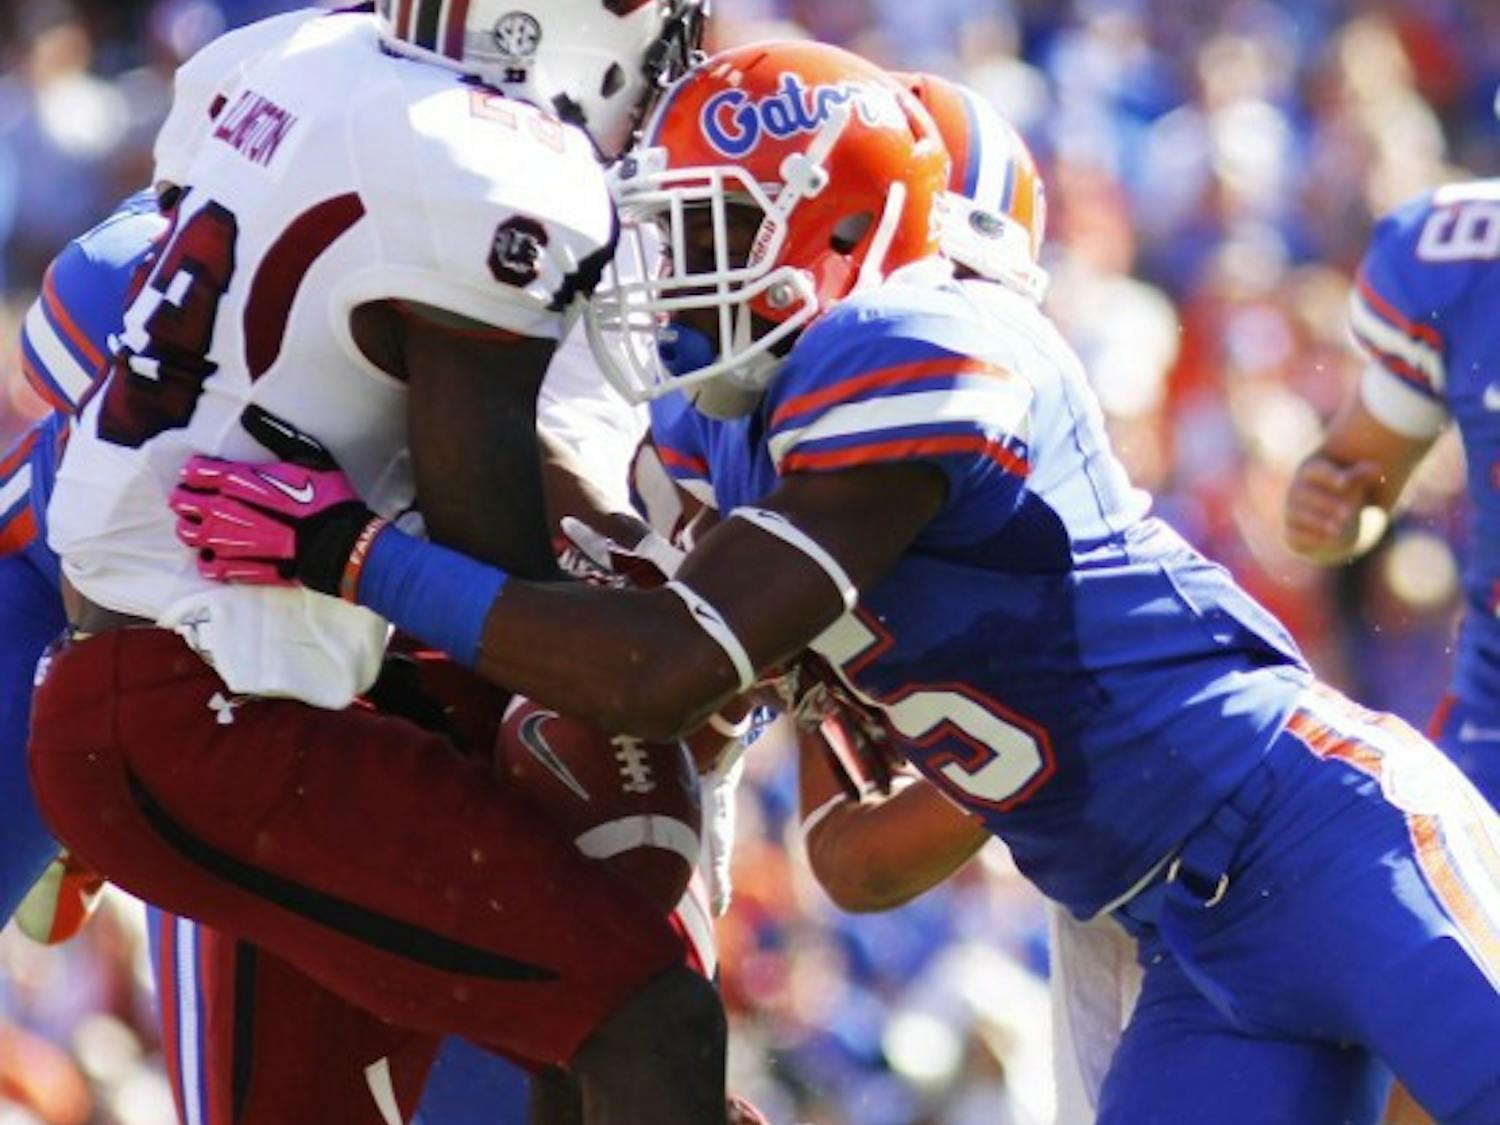 Loucheiz Purifoy (right) forces South Carolina’s Bruce Ellington to fumble during a kick return in the first quarter of Florida’s 44-11 win on Saturday in The Swamp. Ellington recovered the fumble.